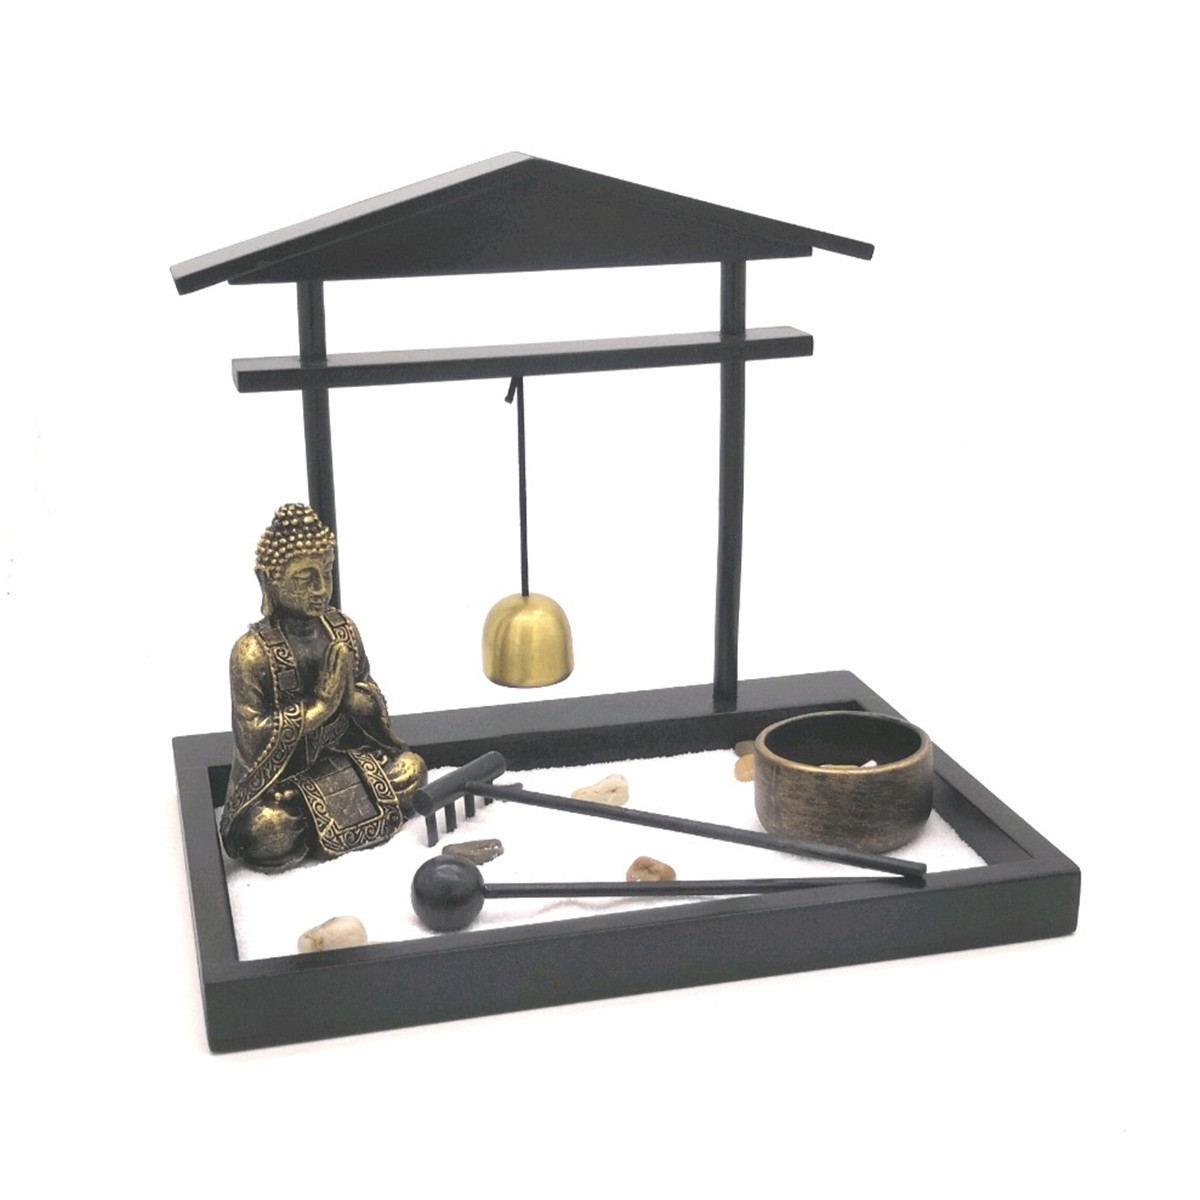 

Zen Statue Candle Holder Meditation Candlestick Figurine Crafts Teahouse Home Decorations Accessories